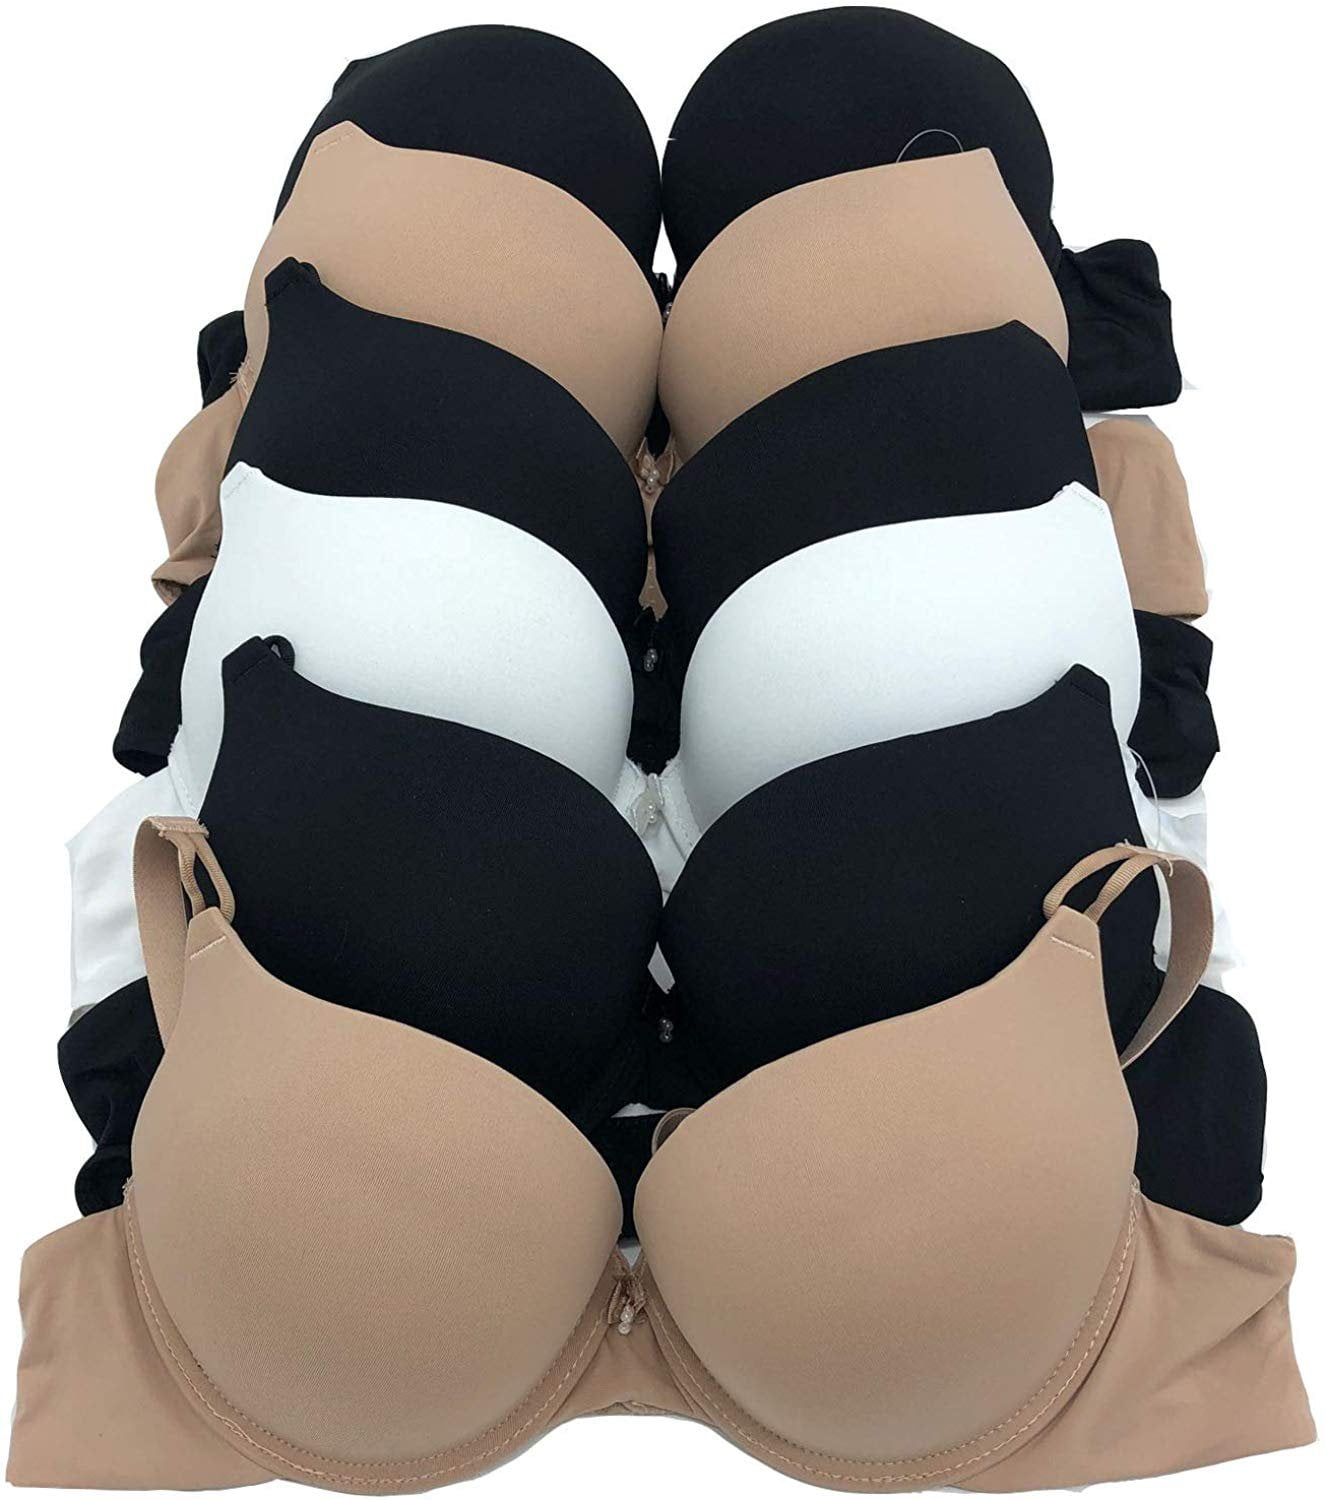 EXTREME DOUBLE PUSH UP Add 2 Cup Sizes Push Up Bra Padded FREE RETURN 1,3  or 6pc 